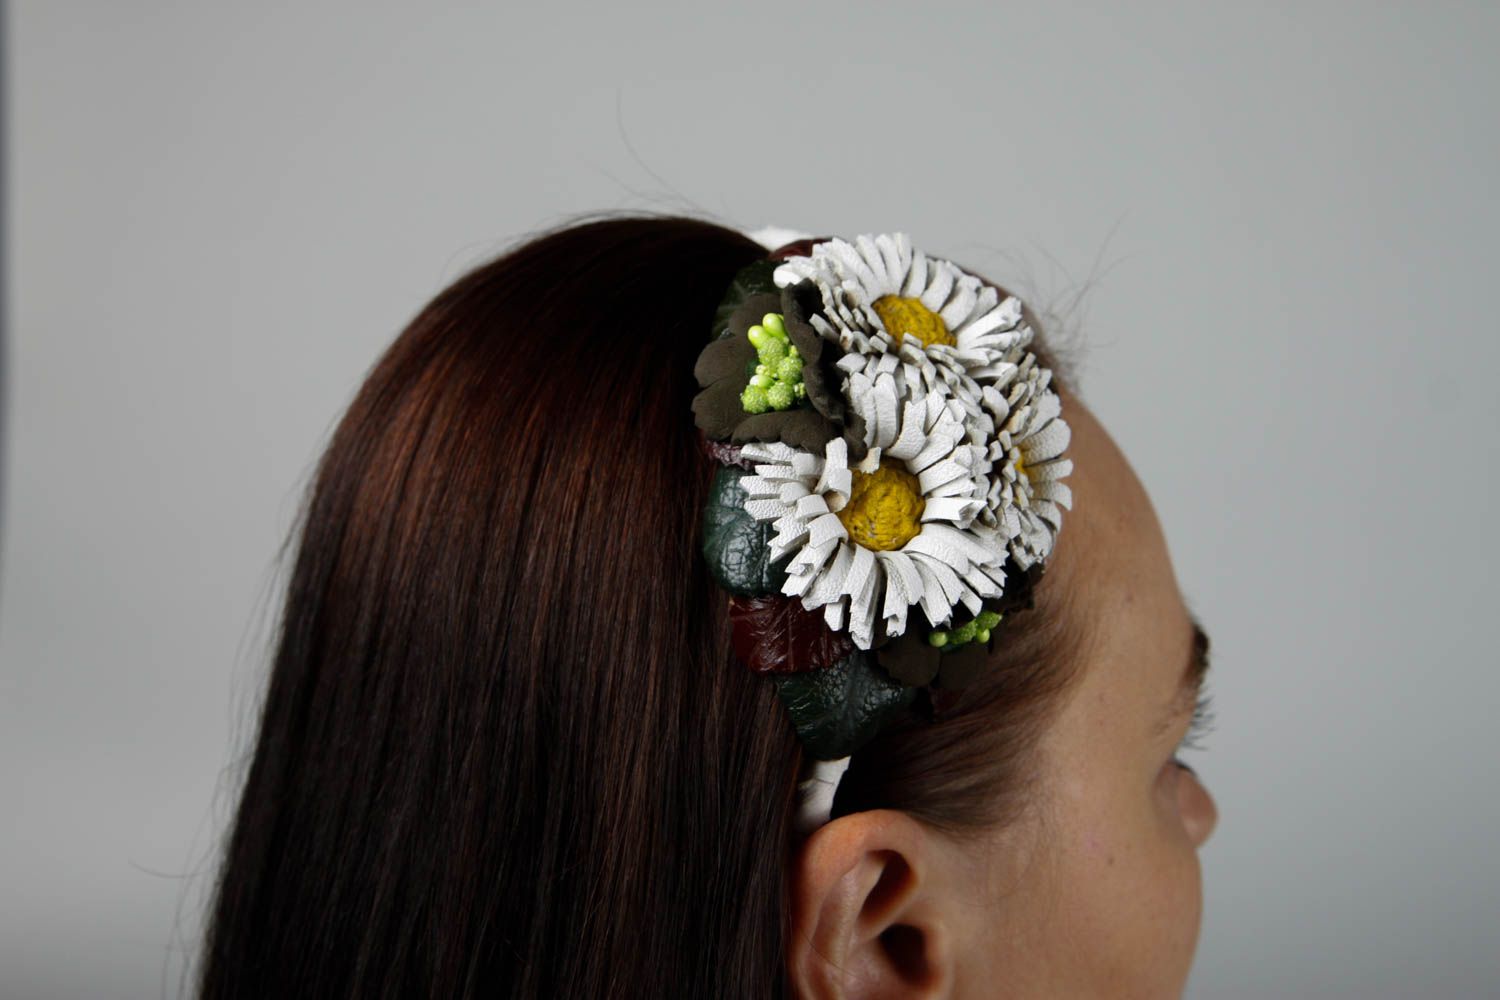 Stylish handmade leather flower headband leather goods hair bands small gifts photo 2